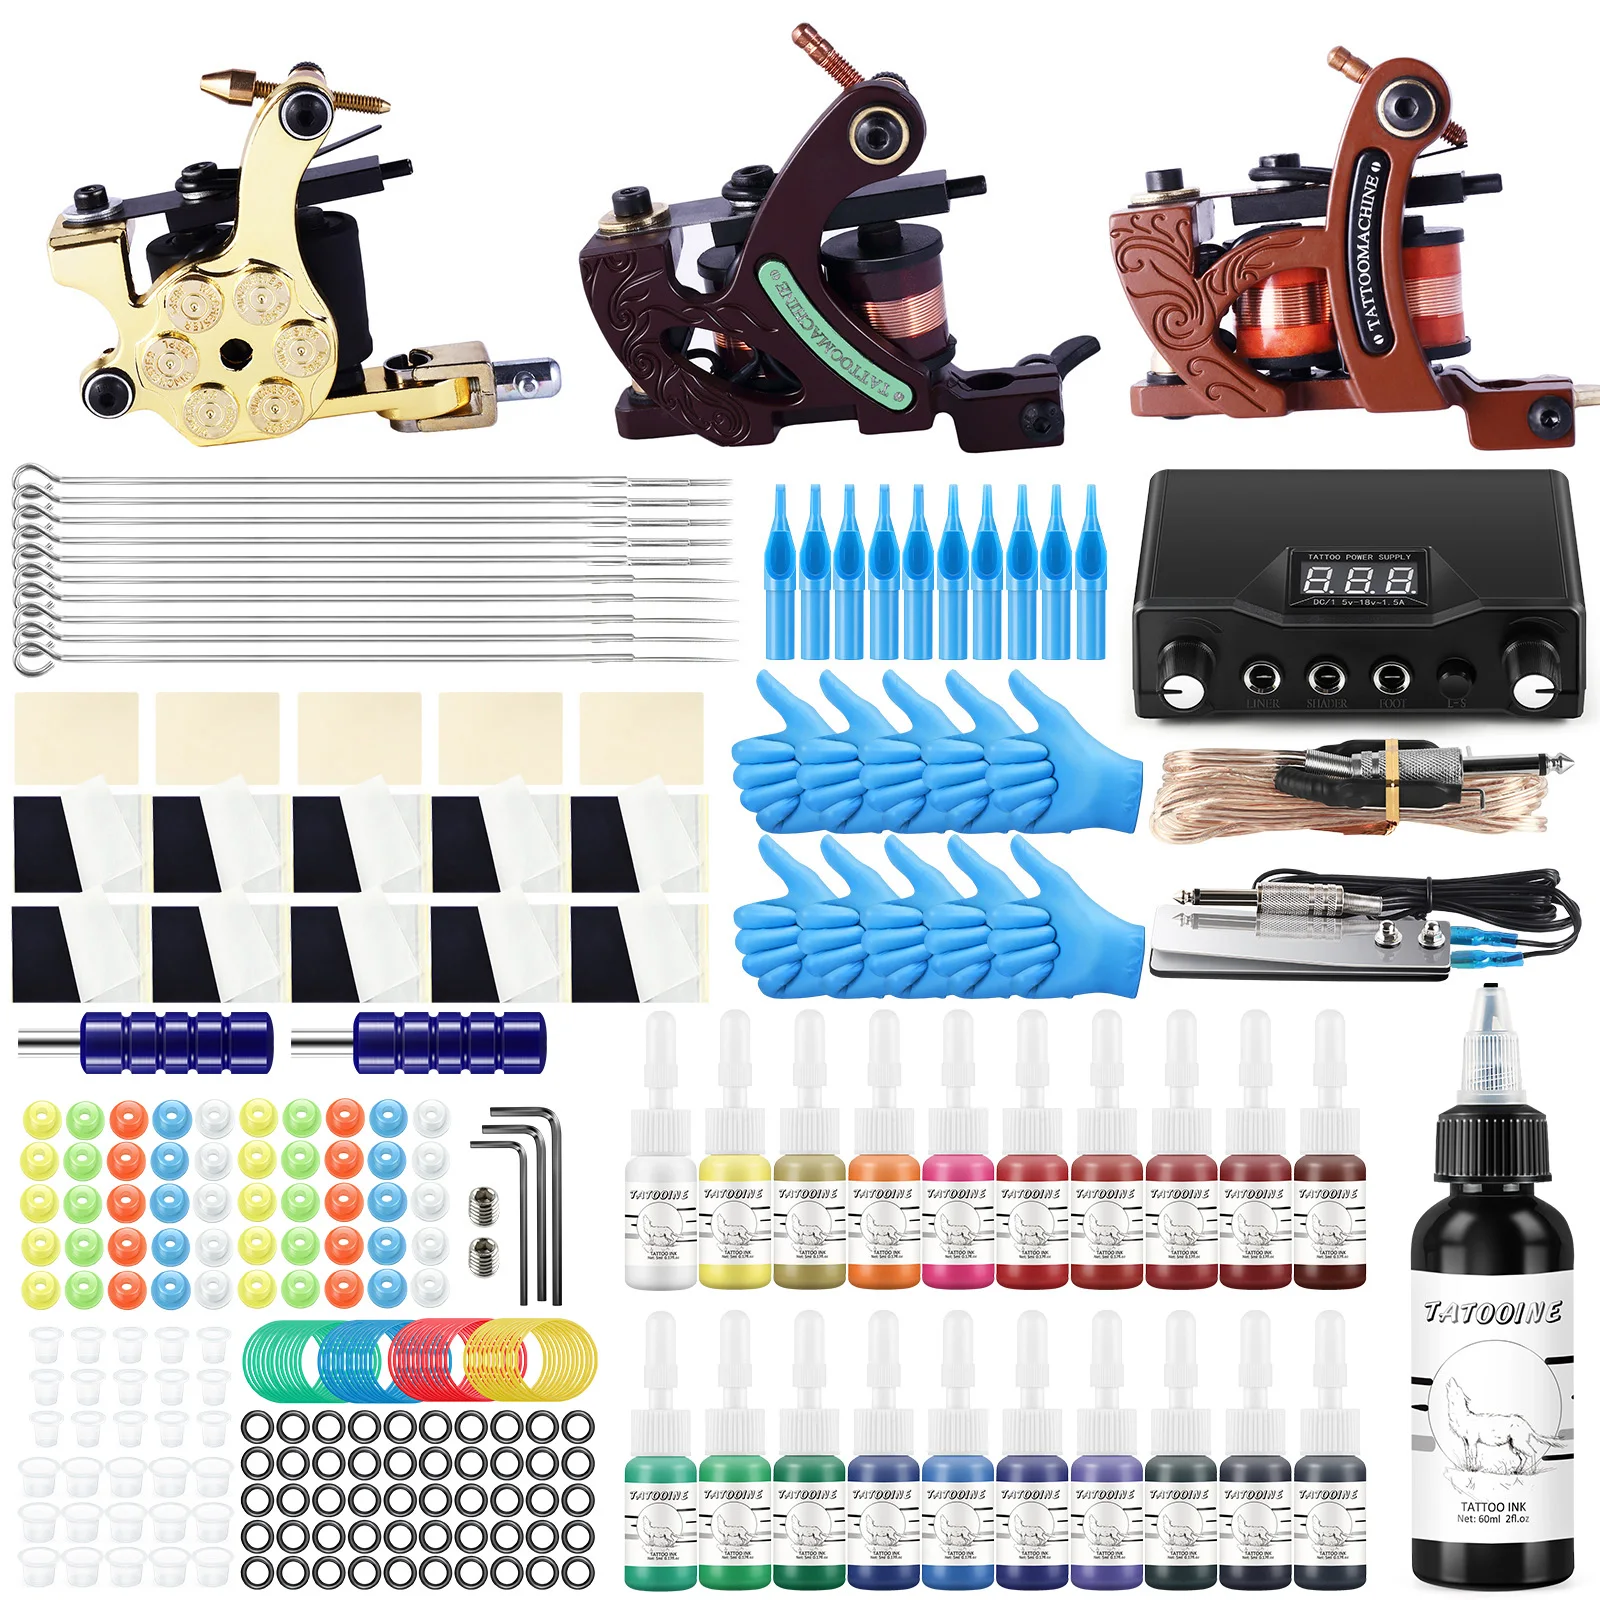 Tattoo Set Accessories Supplies Professional Tattoo Kit Complete Tattoo Machines Gun With Ink Power Supply Grips Body Art Tools